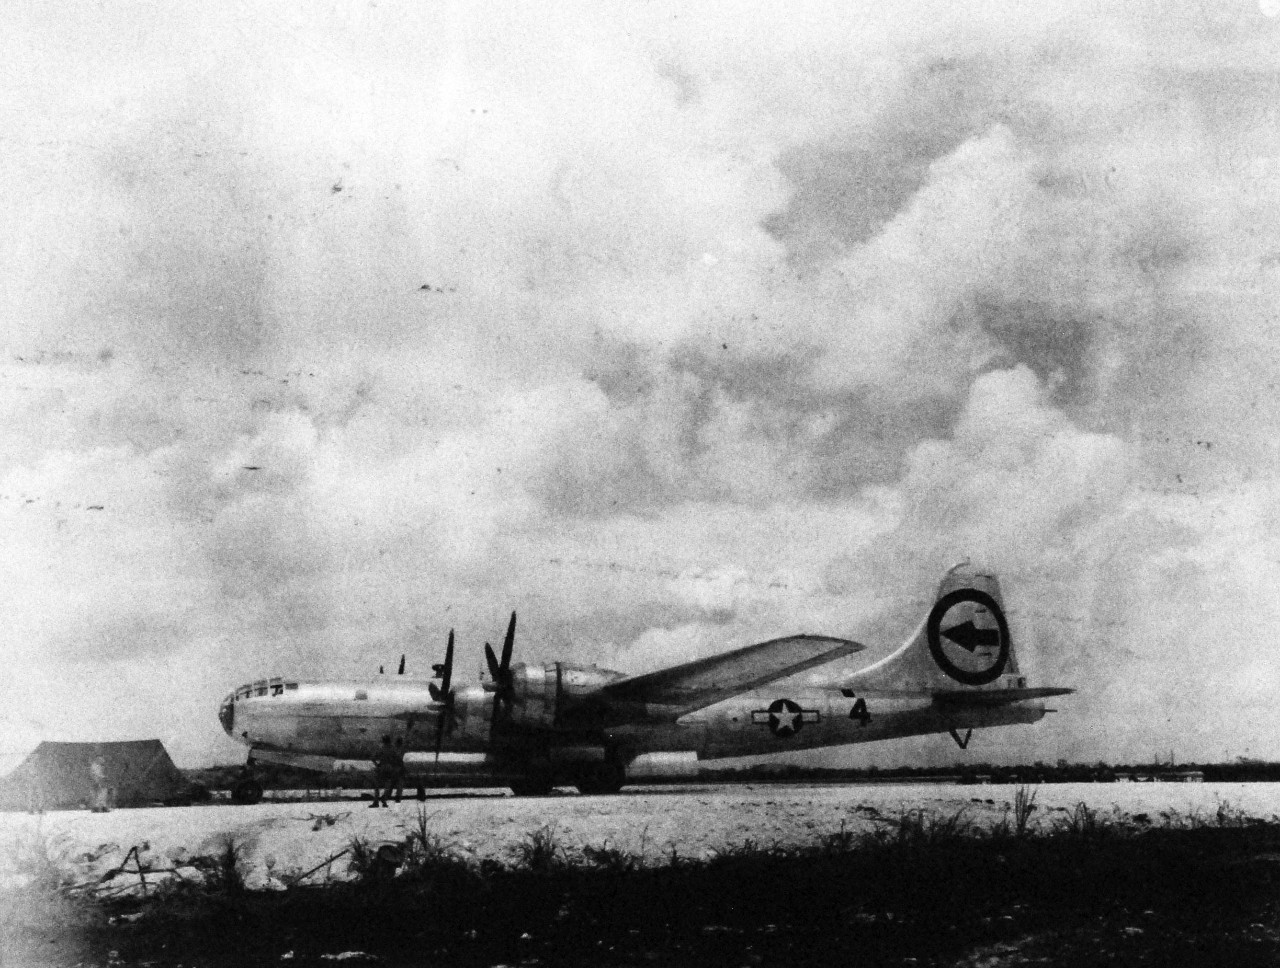 77-BT-67:   Tinian Island, August 1945.   Boeing B-29 Superfortress plane, Bockscar, which dropped “Fat Man” over Nagasaki on August 9, 1945.  Official photograph of the Office of Chief of Engineers, now in the collection of the National Achives.   (2015/08/25). 